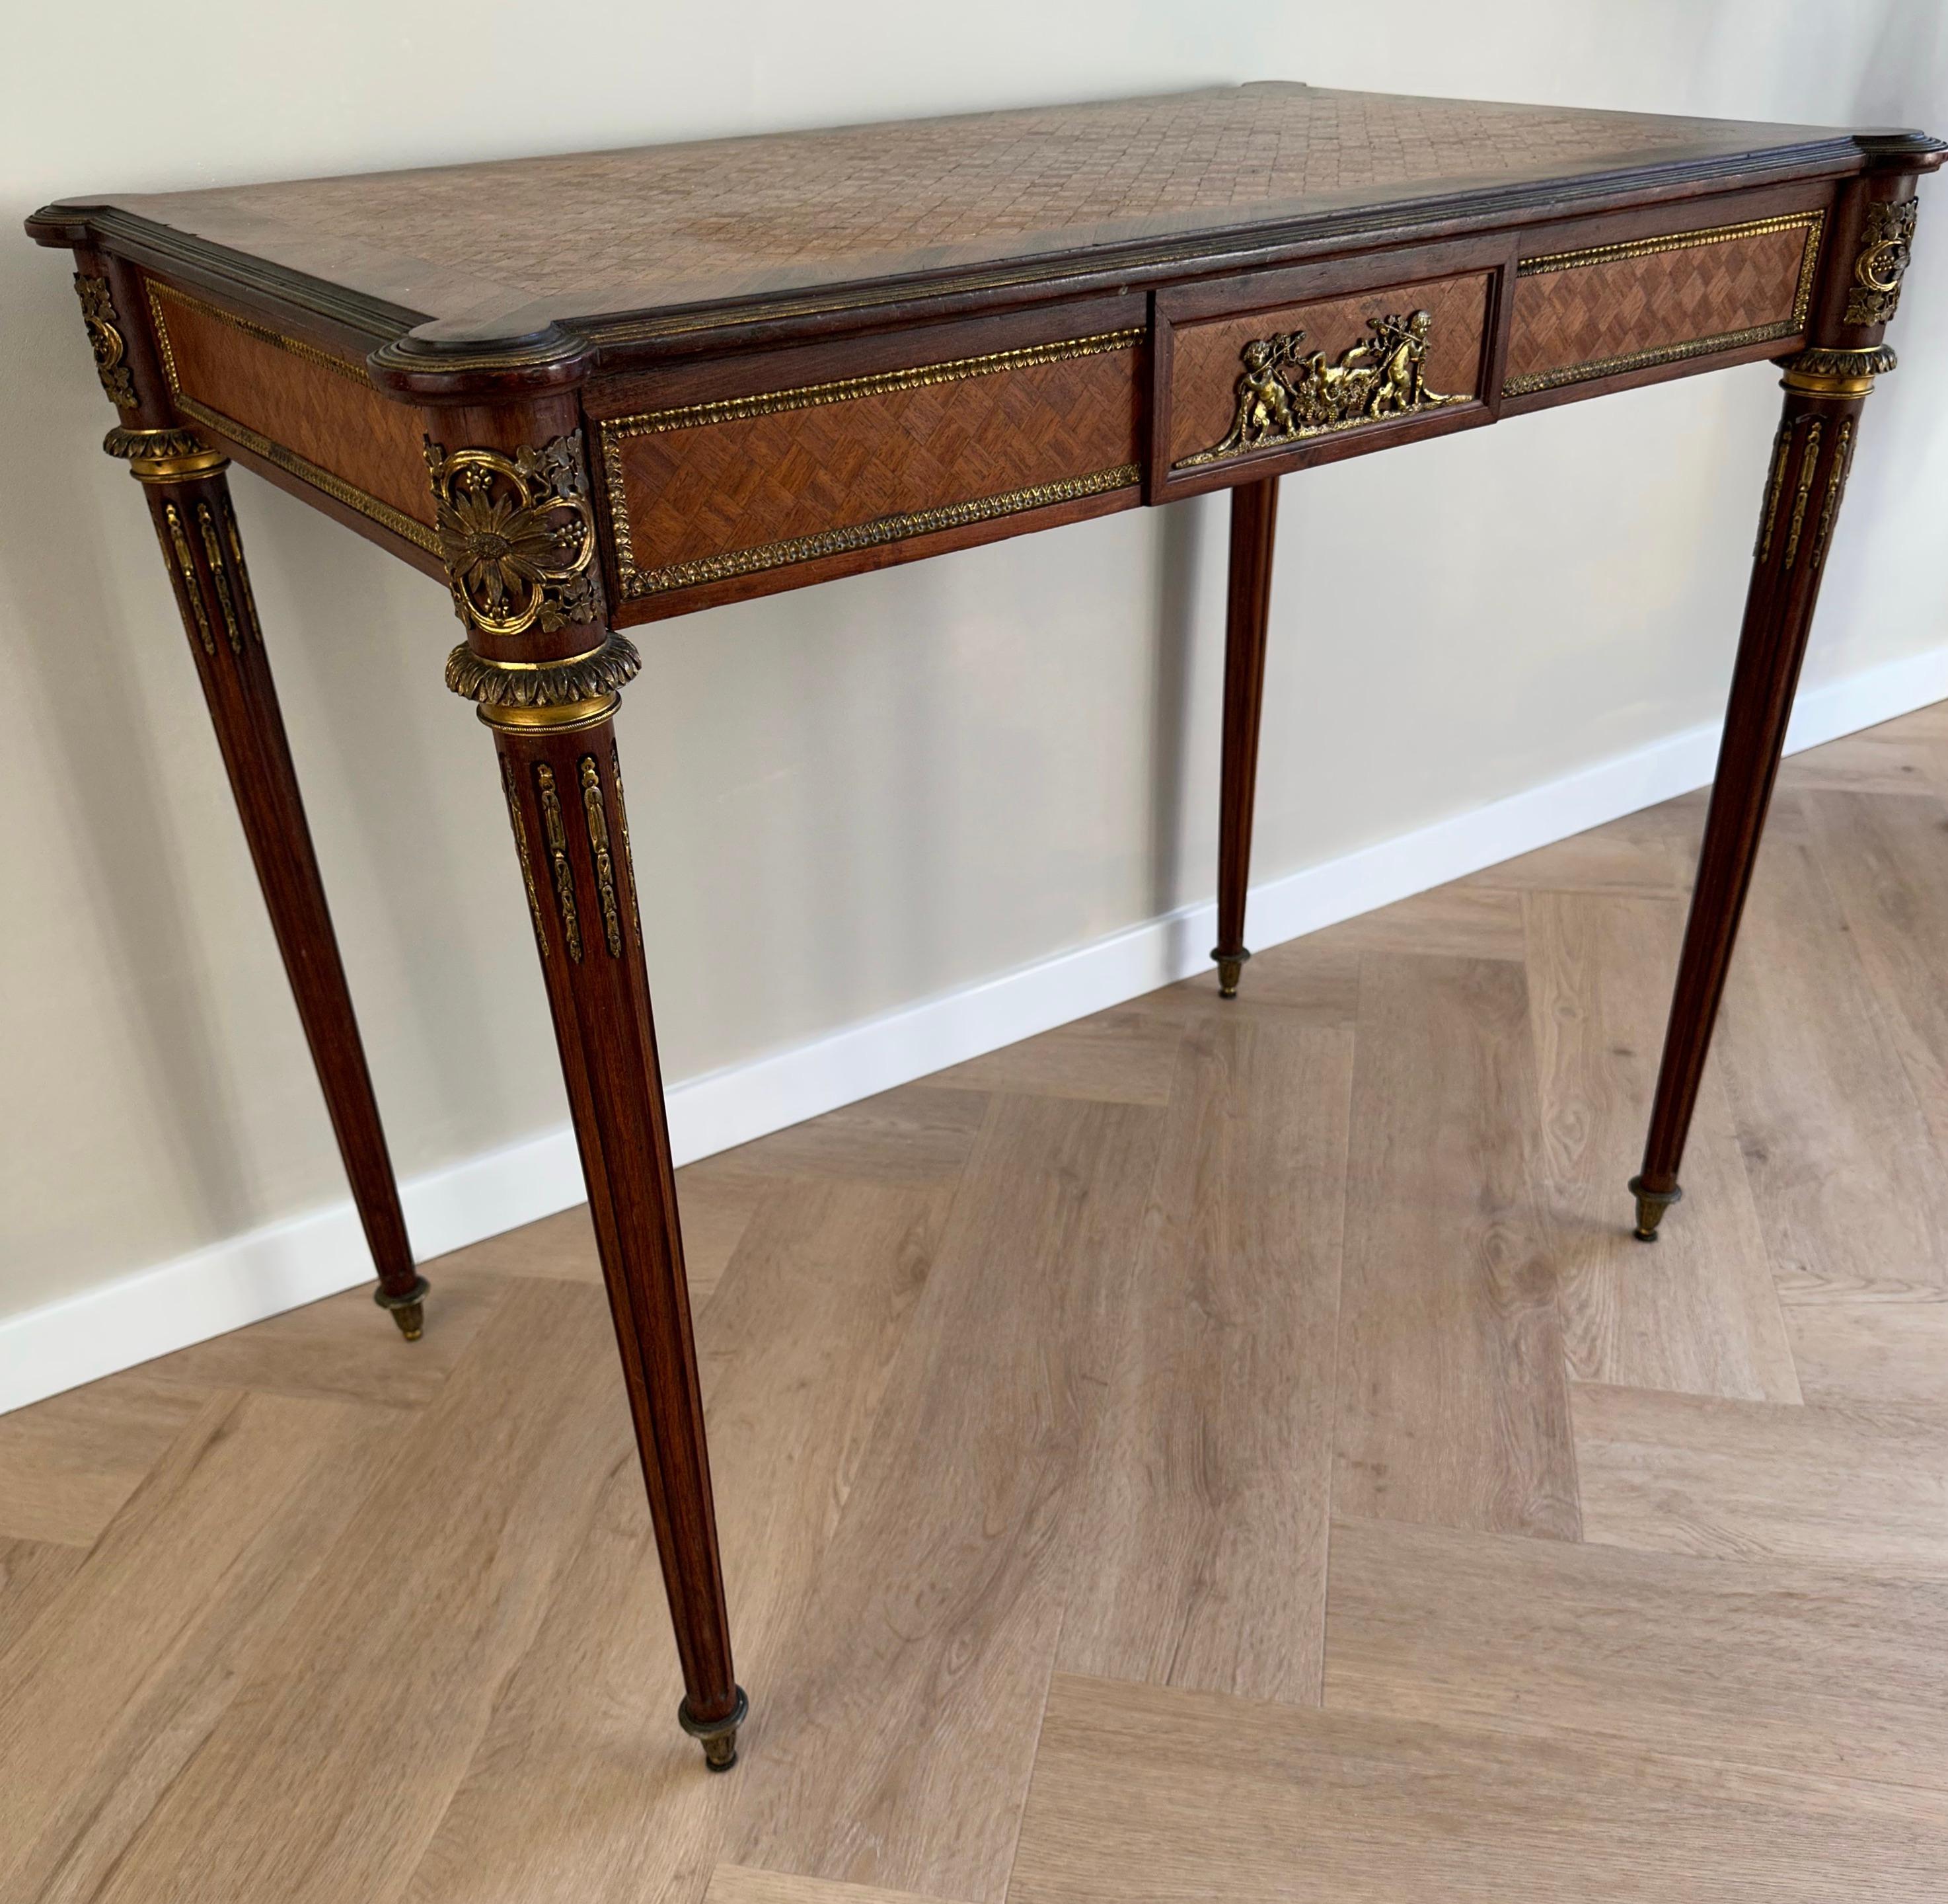 Fine quality and great design Napoleon III desk with large drawer and bronze angels.

This wonderful antique ladies desk also is highly practical because of the open design and the larger drawer. This fine specimen is supported by four elegant